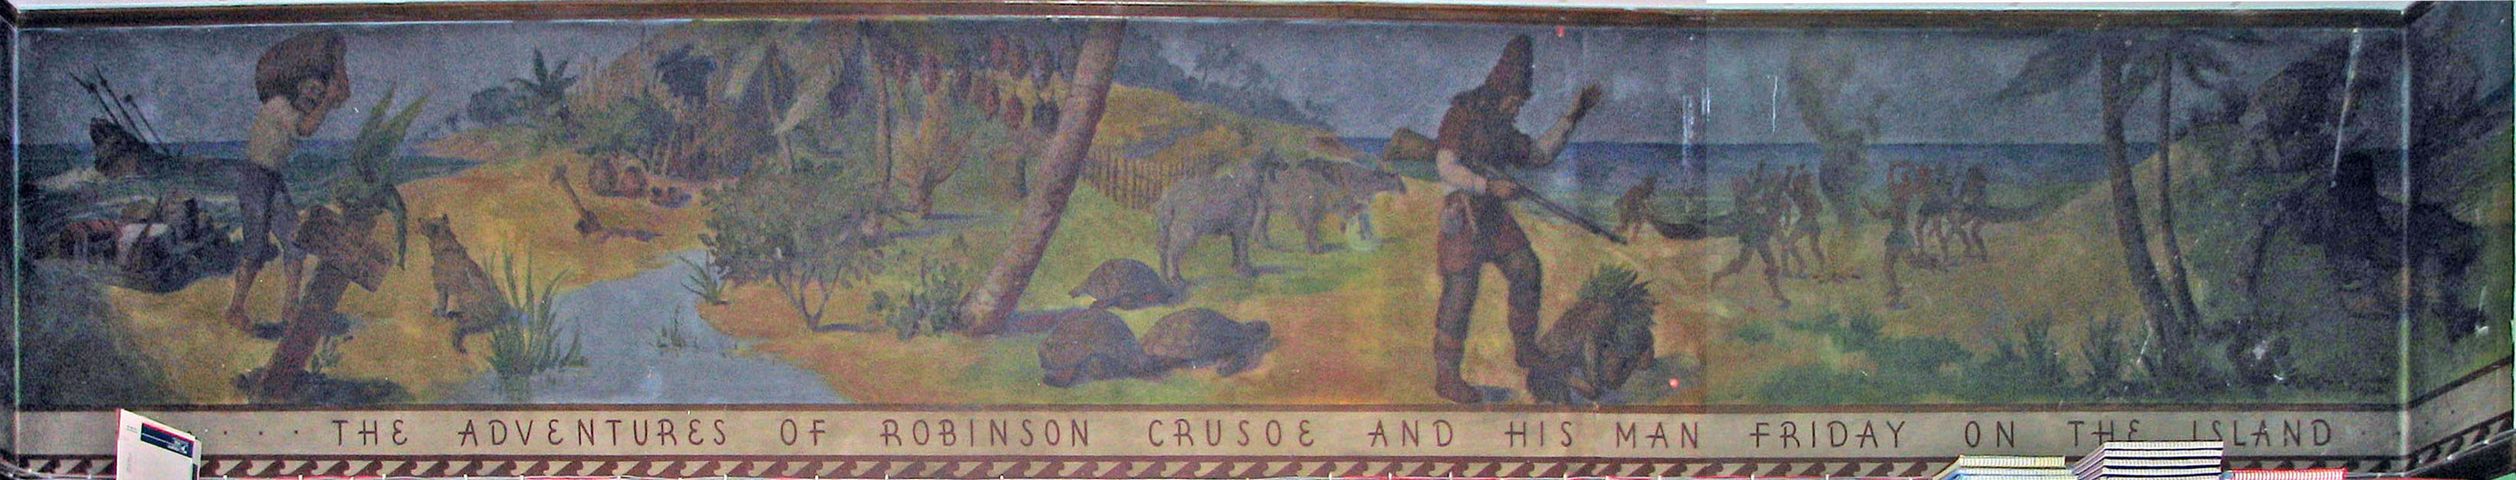 right half of surviving Barber School mural (the adventures of Robinson Crusoe and his man Friday on the island)